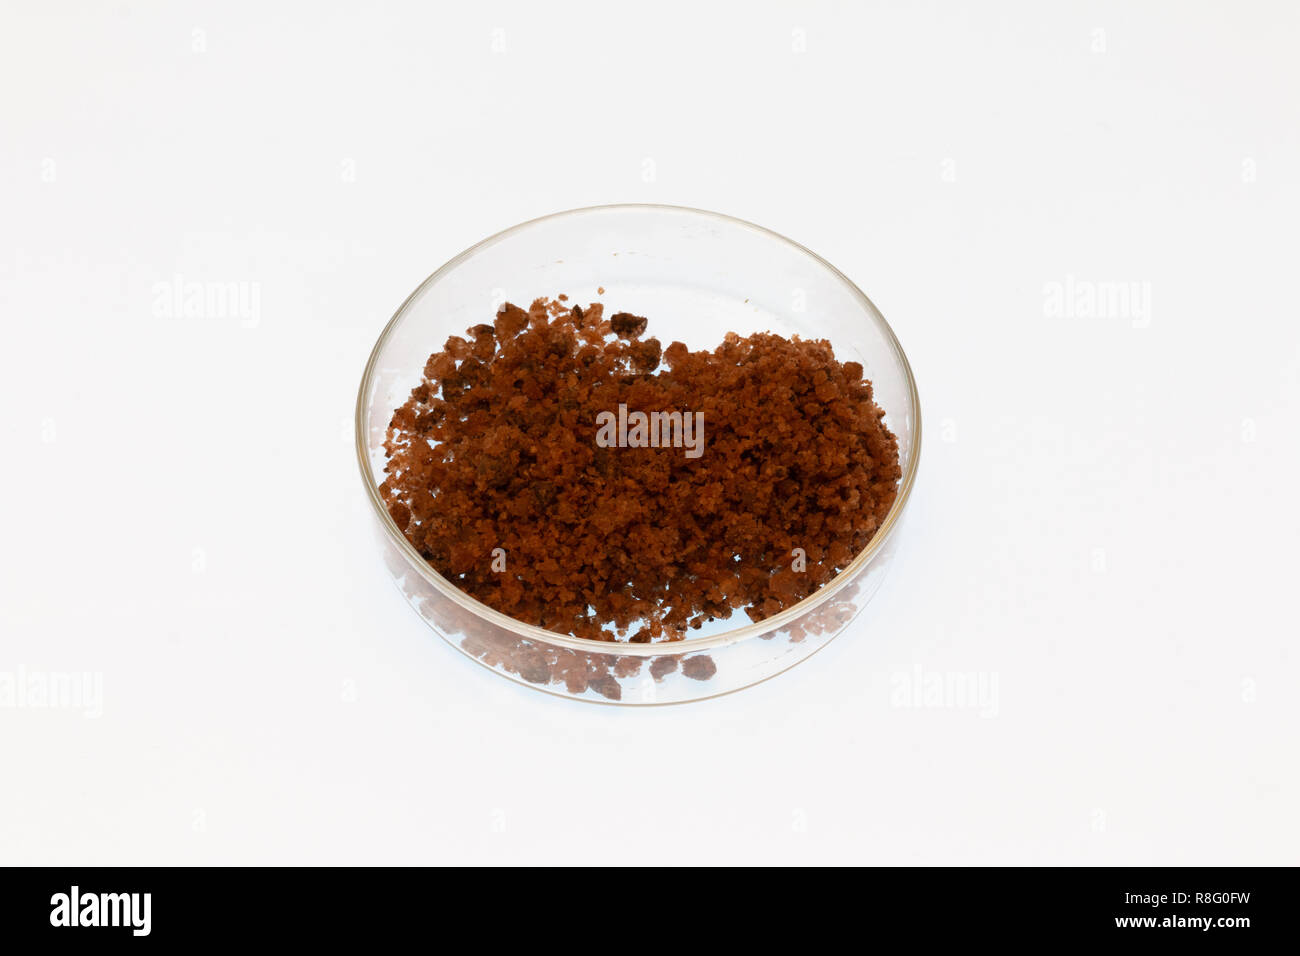 Glass petri dish containing natural rock salt, on a white background Stock Photo